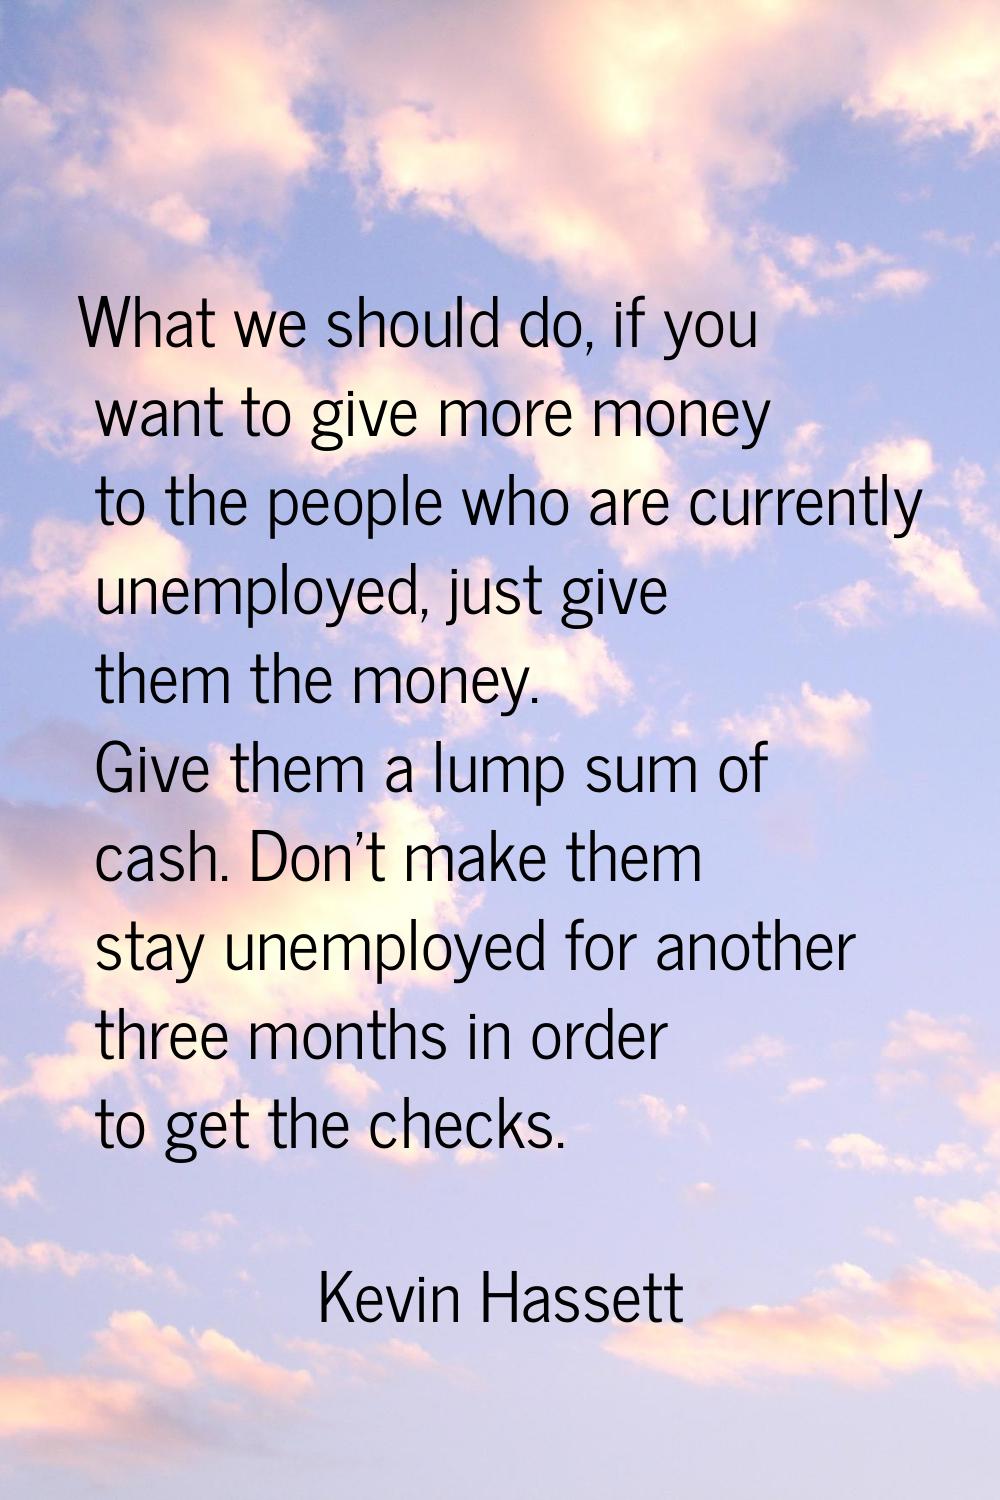 What we should do, if you want to give more money to the people who are currently unemployed, just 